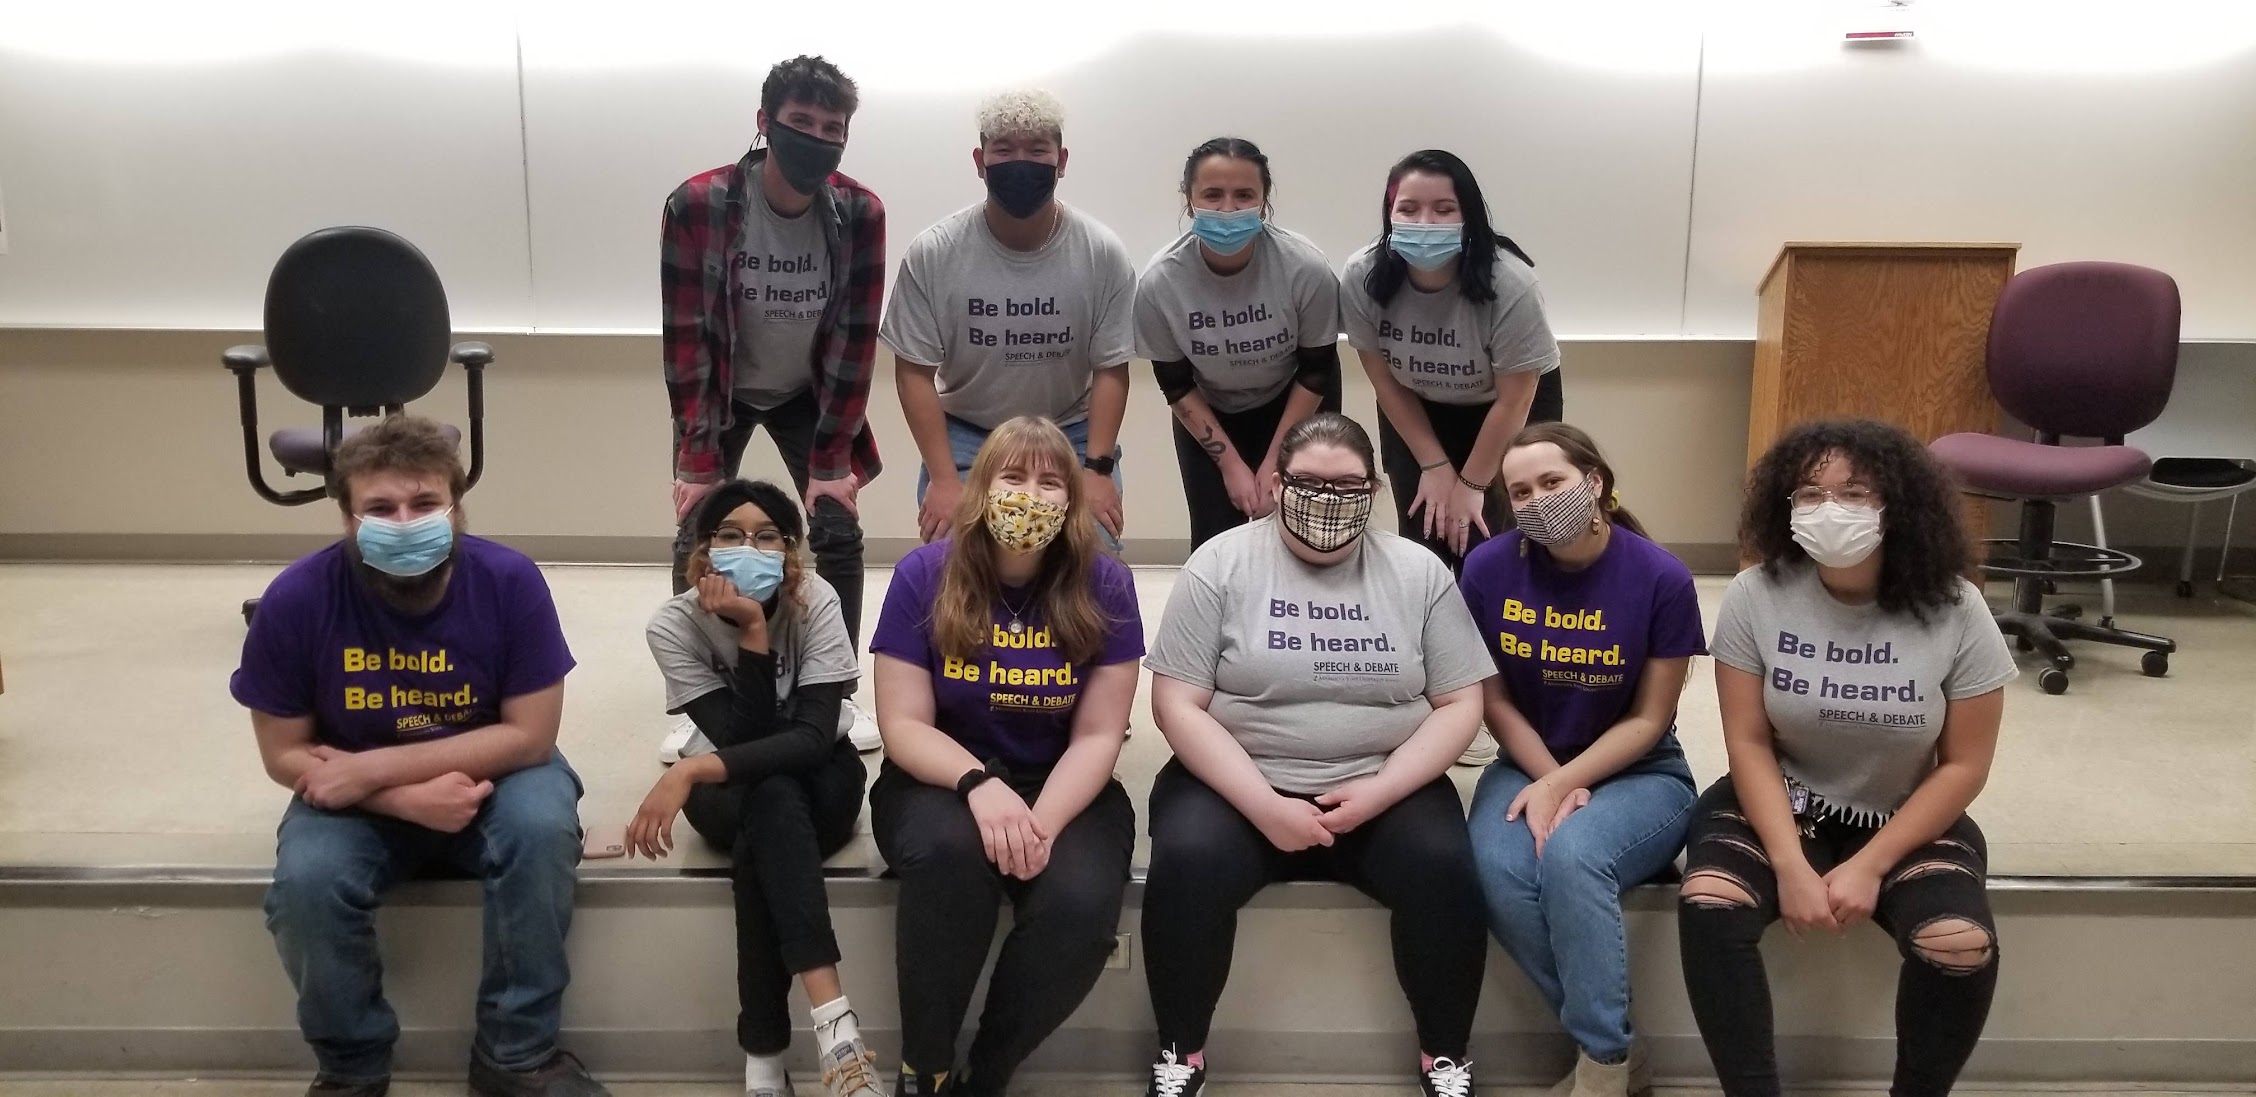 Speech and debate team posing with masks on in the classroom